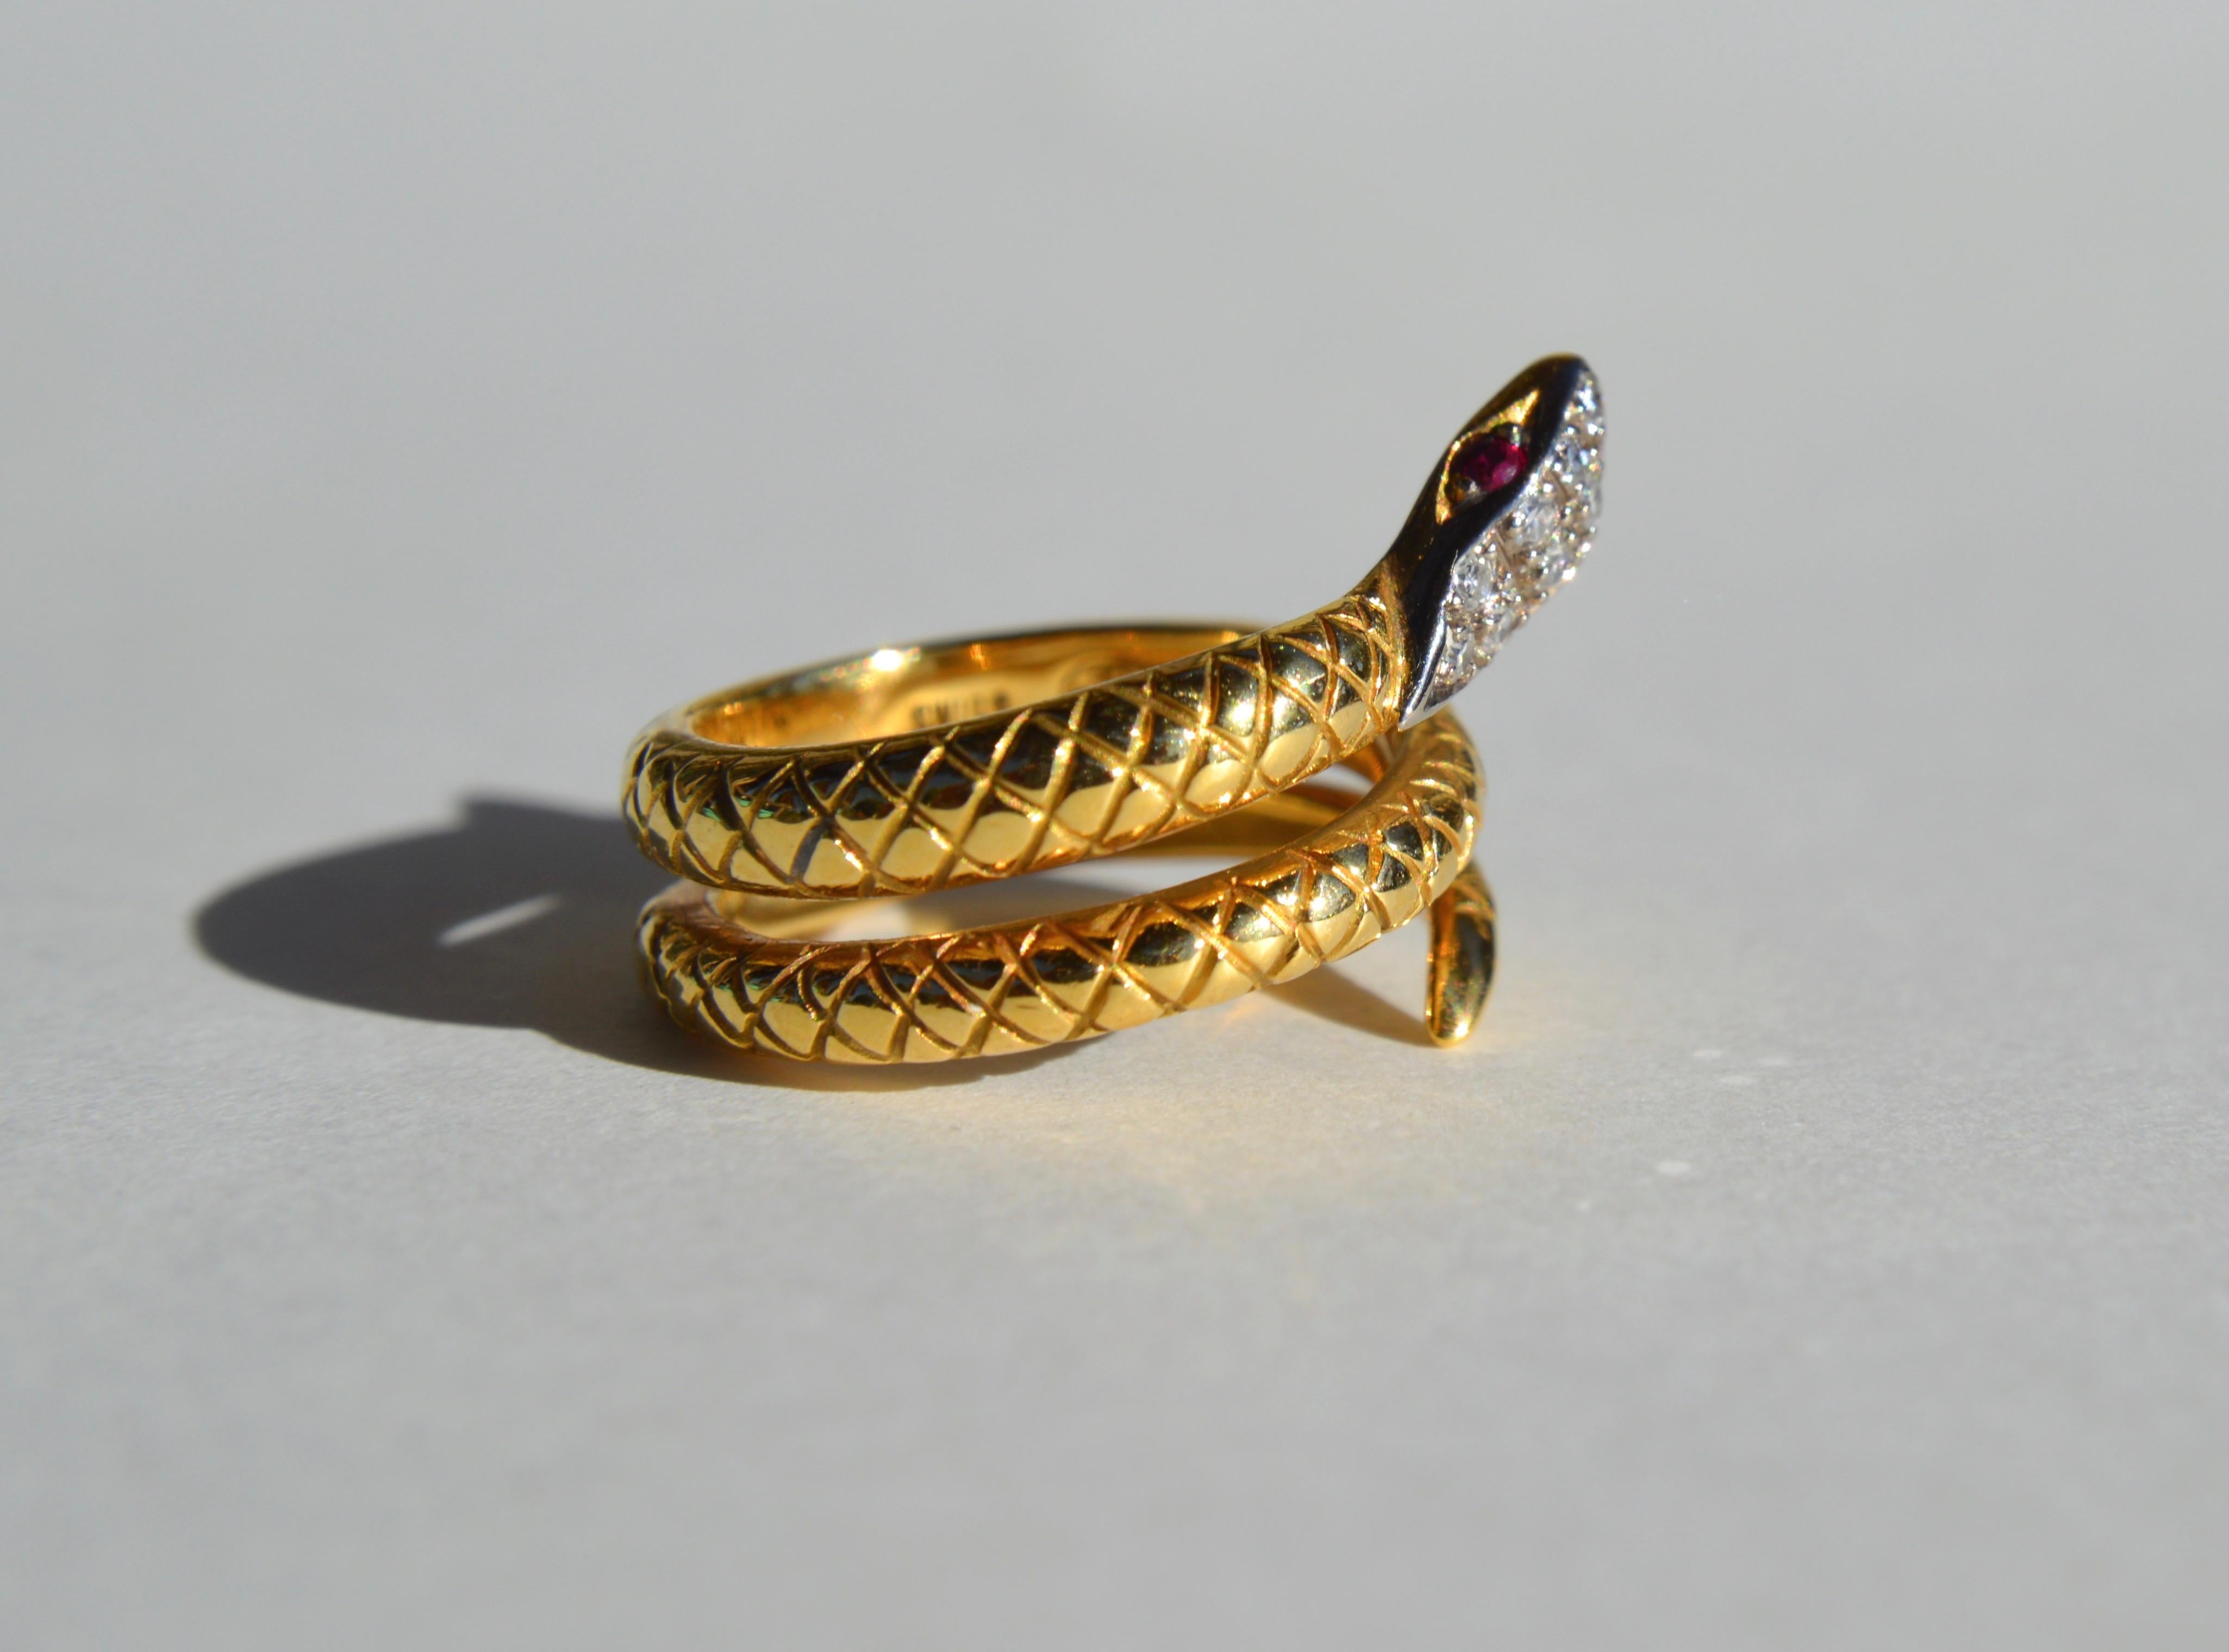 Beautiful Art Deco era circa 1920s - 1930s 18K yellow gold snake wrap ring with 8 round cut diamonds (each .015 carat, 1.5mm diameter) and round cut ruby eyes (each .015 carat, 1.5mm diameter). Size 4.5. Marked as 750 (18K gold) and stamped as